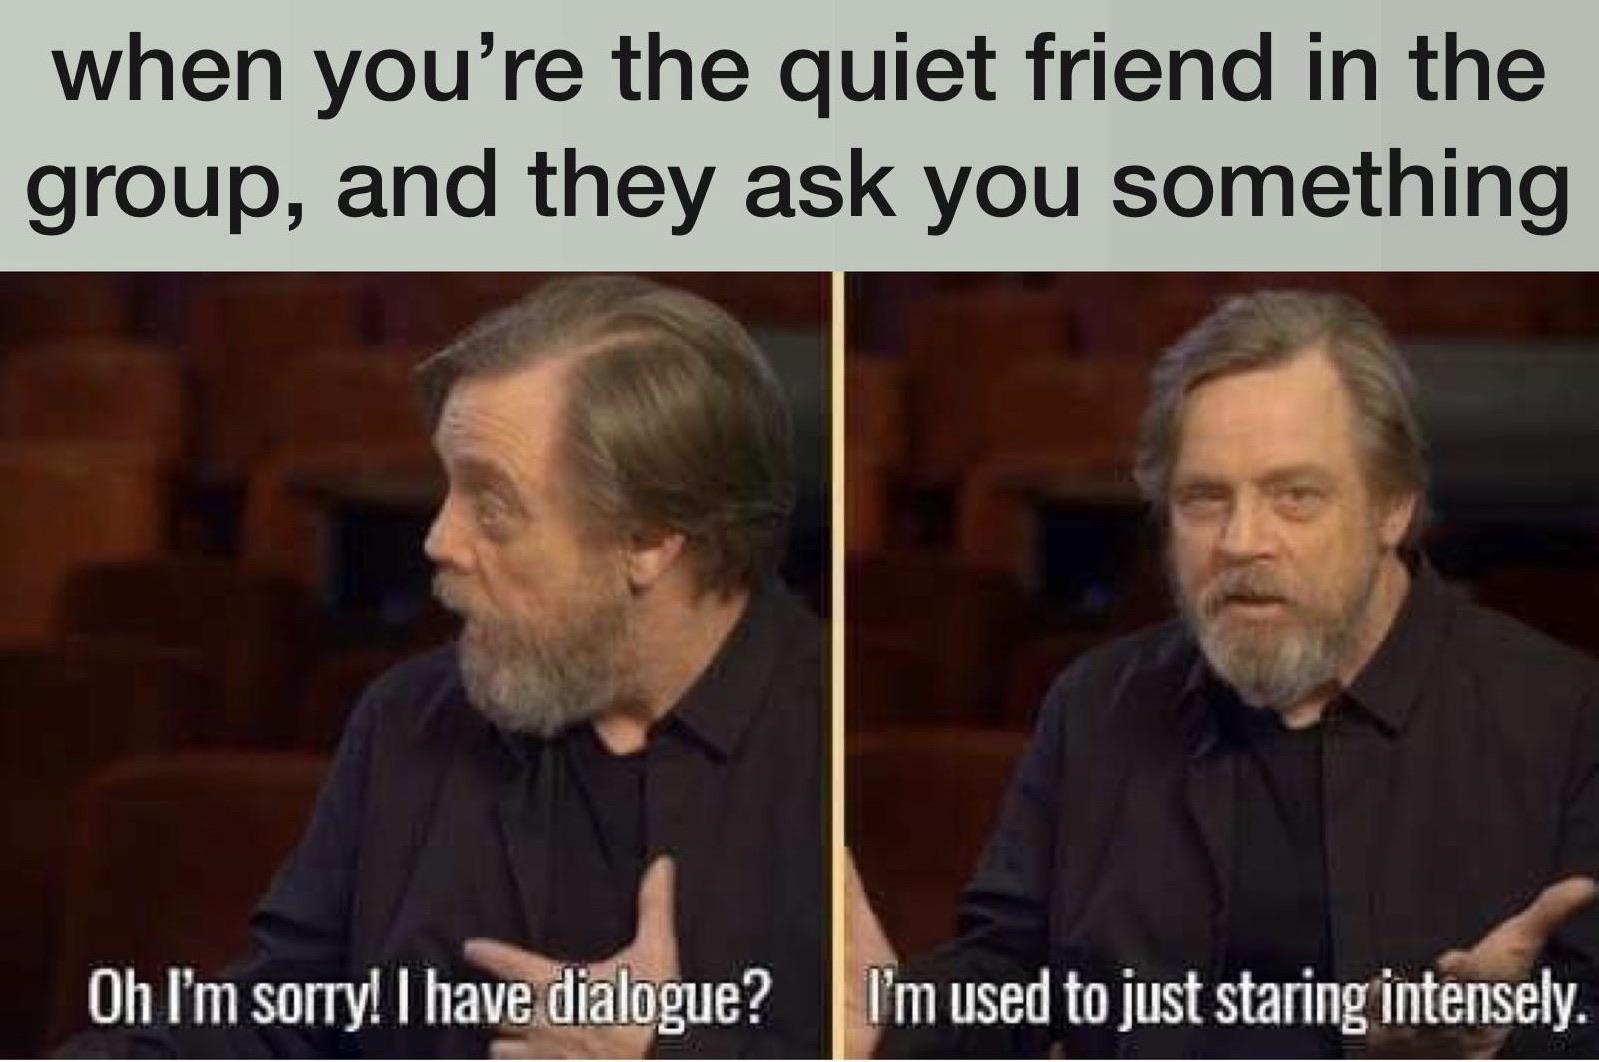 Funny, NPC, Hamill other memes Funny, NPC, Hamill text: when you're the quiet friend in the group, and they ask you something Oh I'm sow! I havemdlalogue? I'm used tojuststaringintensely. 